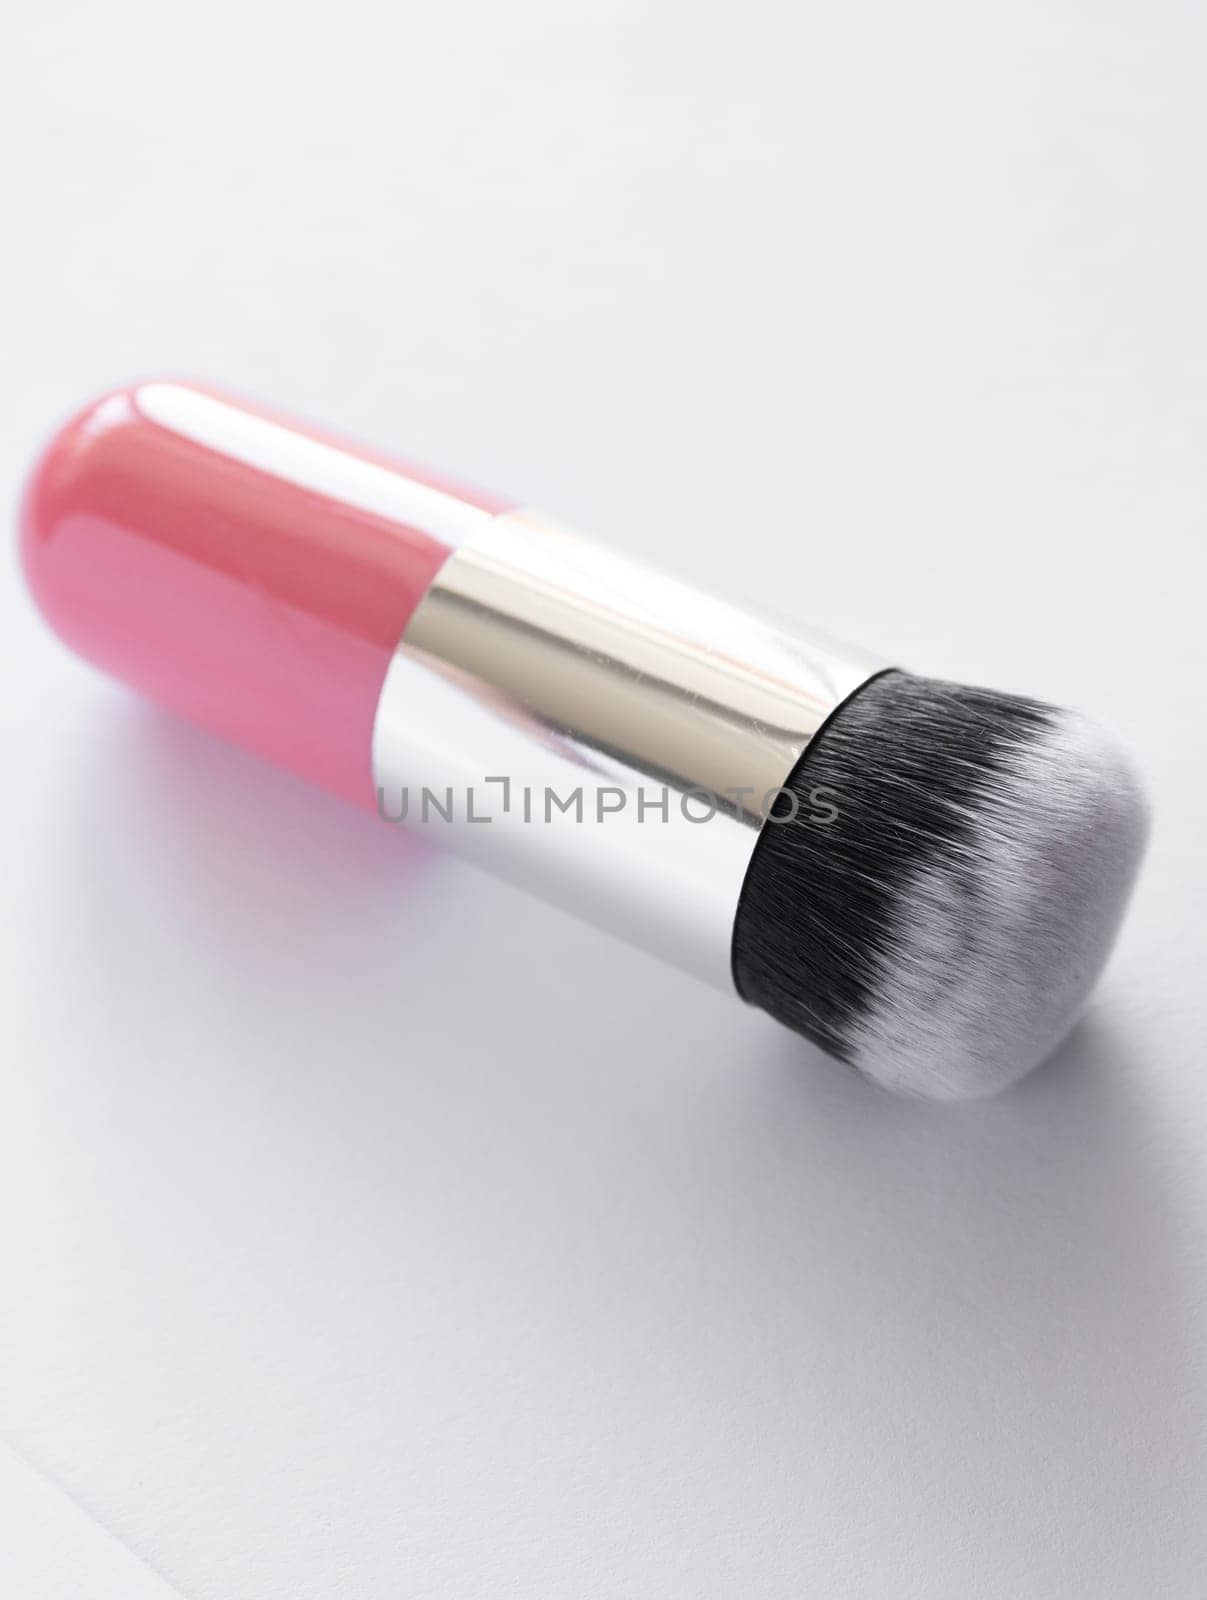 Make up brush for powder blusher isolated on white background by Satura86